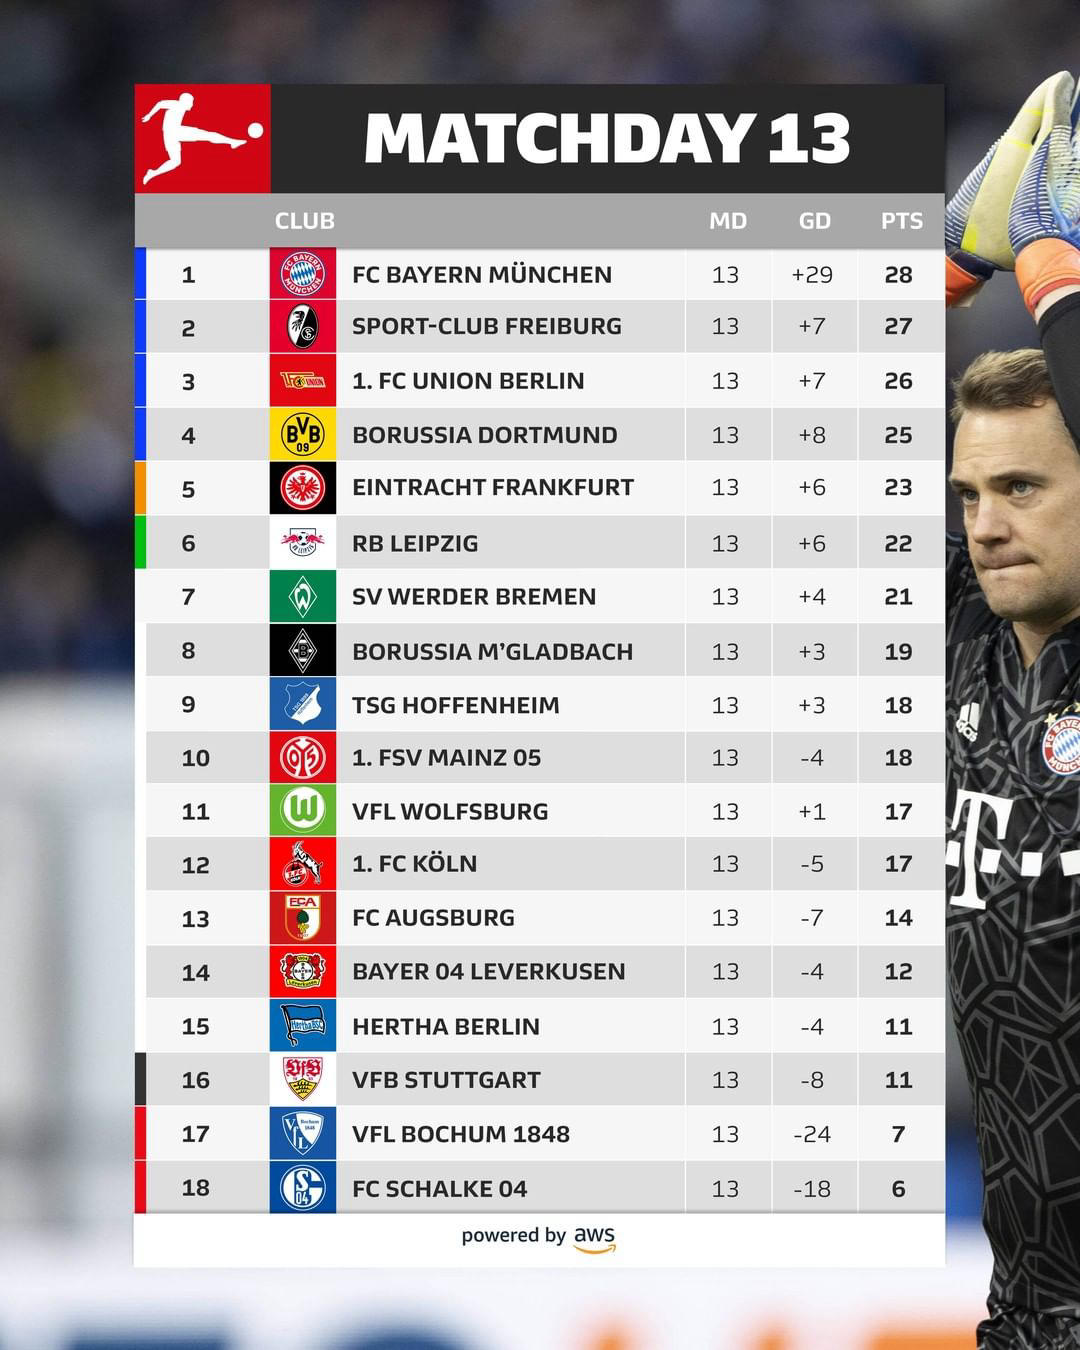 Bundesliga - It's #FCBayern who lead the way in the #Bundesliga after #MD13